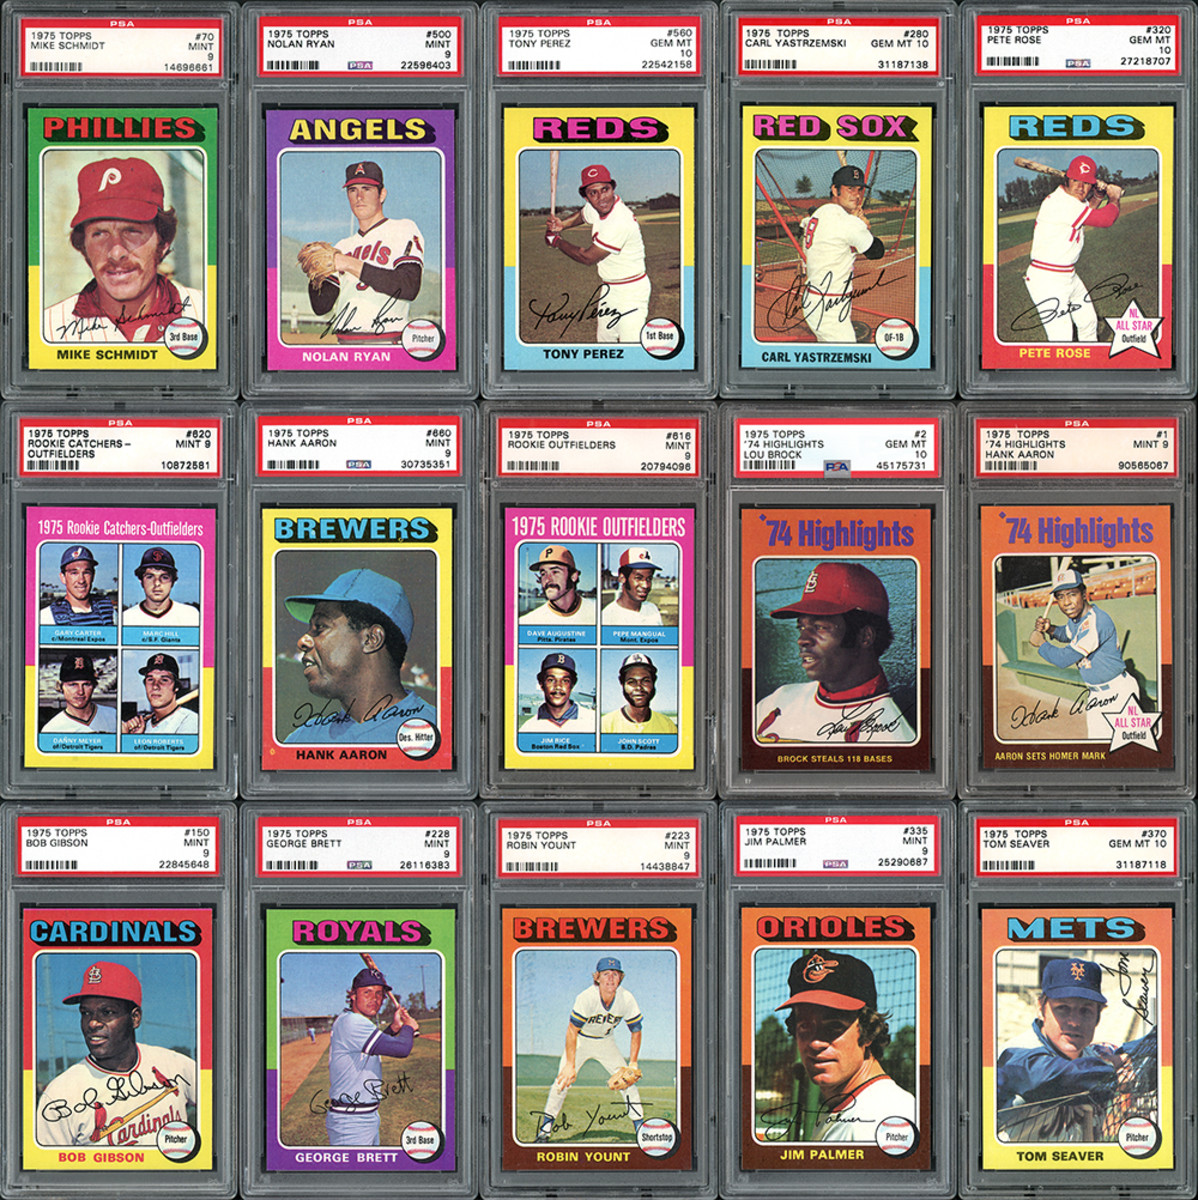 A 1975 Topps complete set, ranked #2 on the PSA Set Registry.